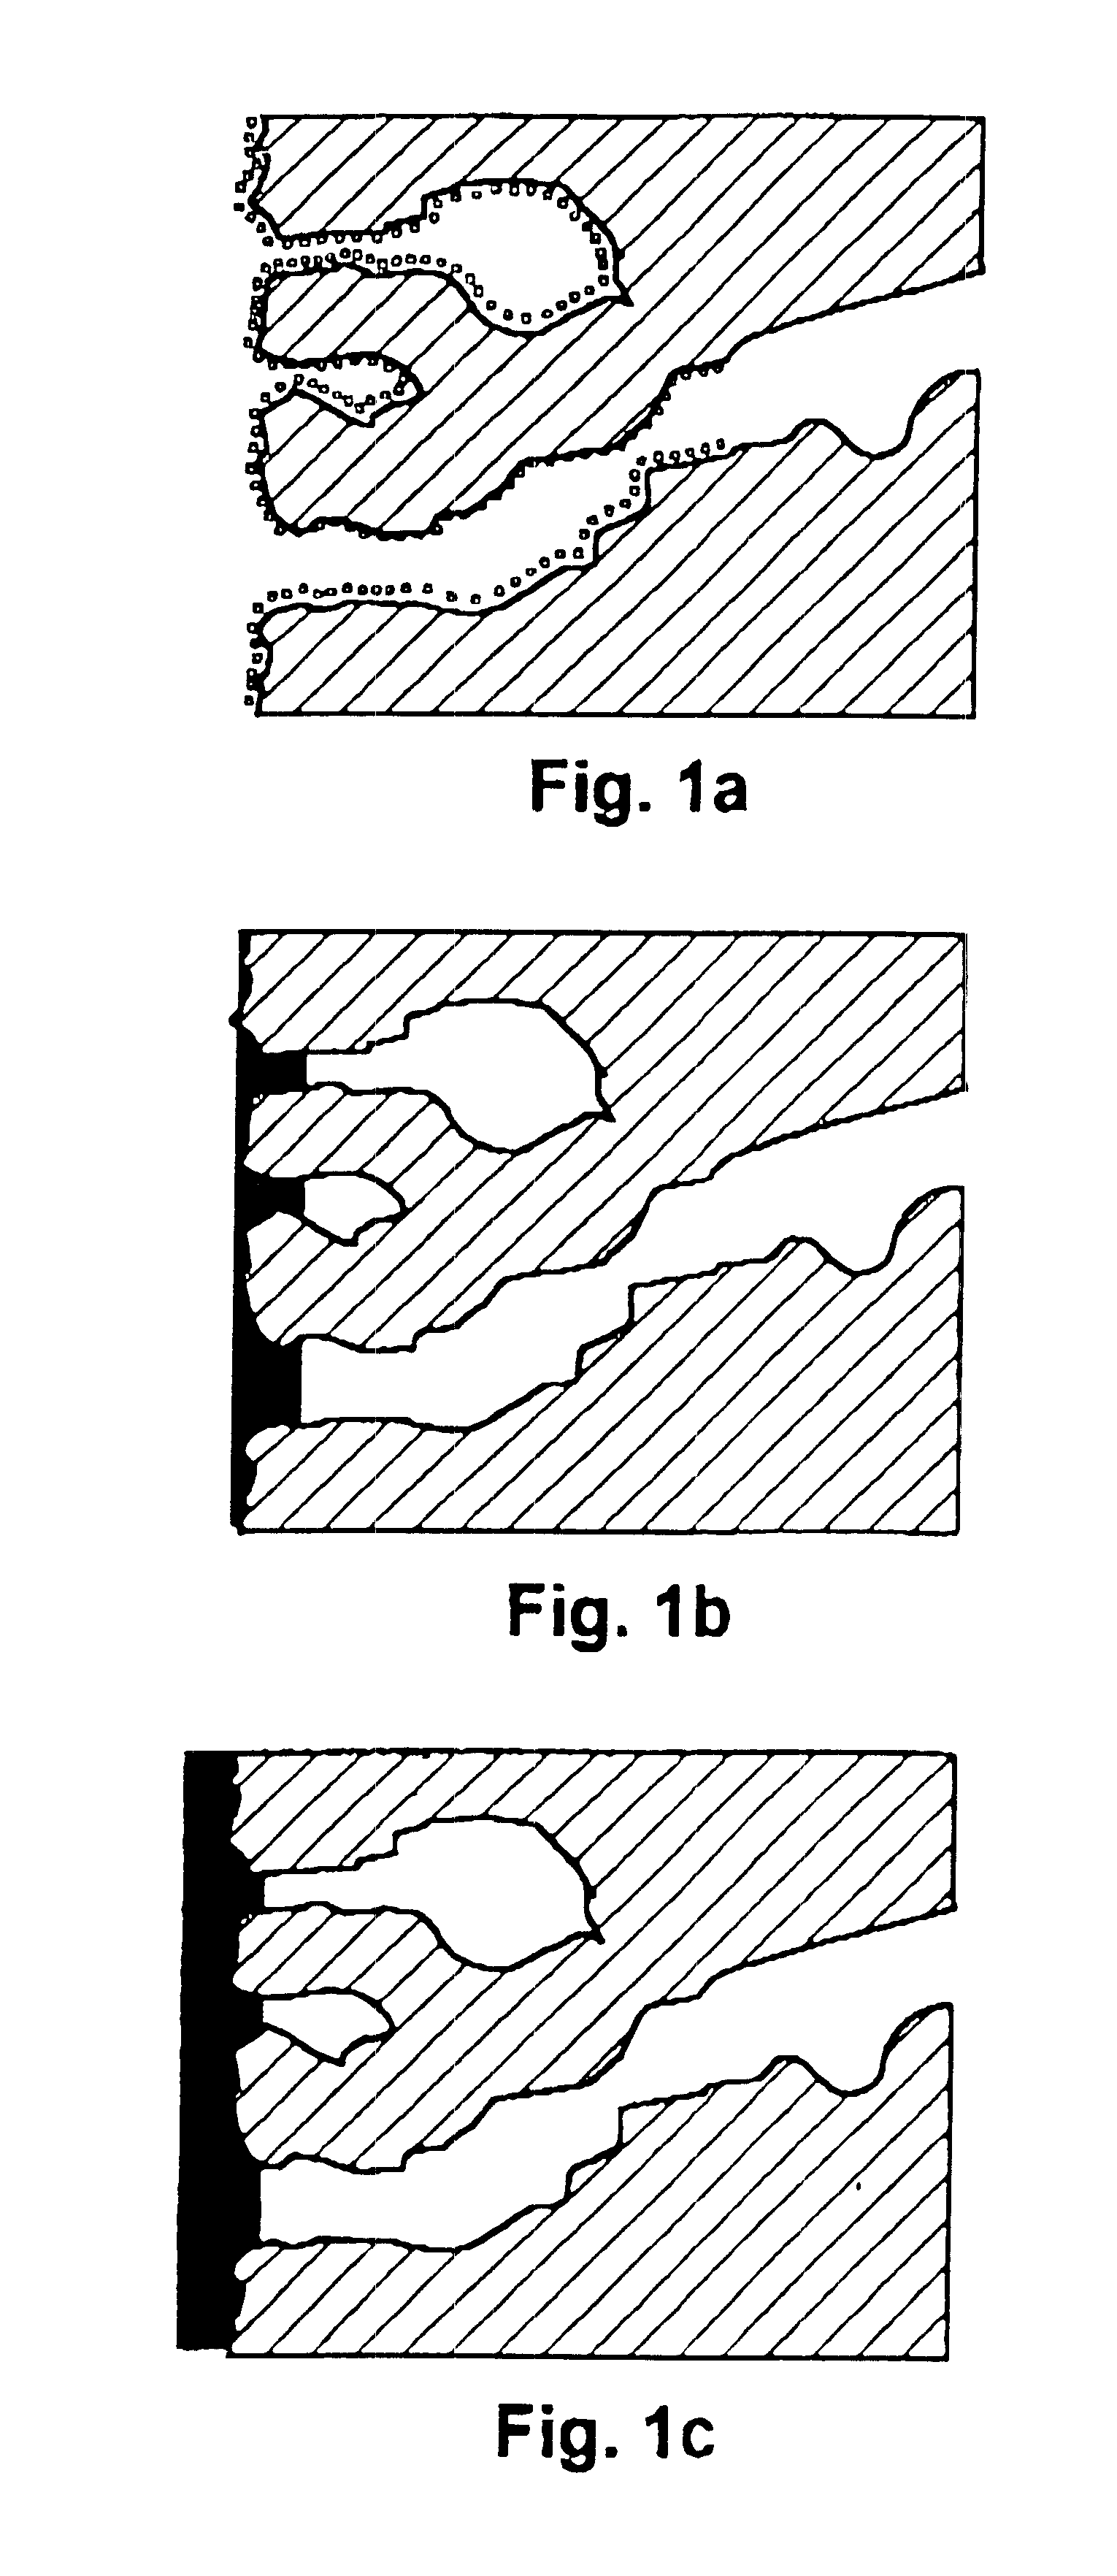 Method for sealing porous building materials and building components